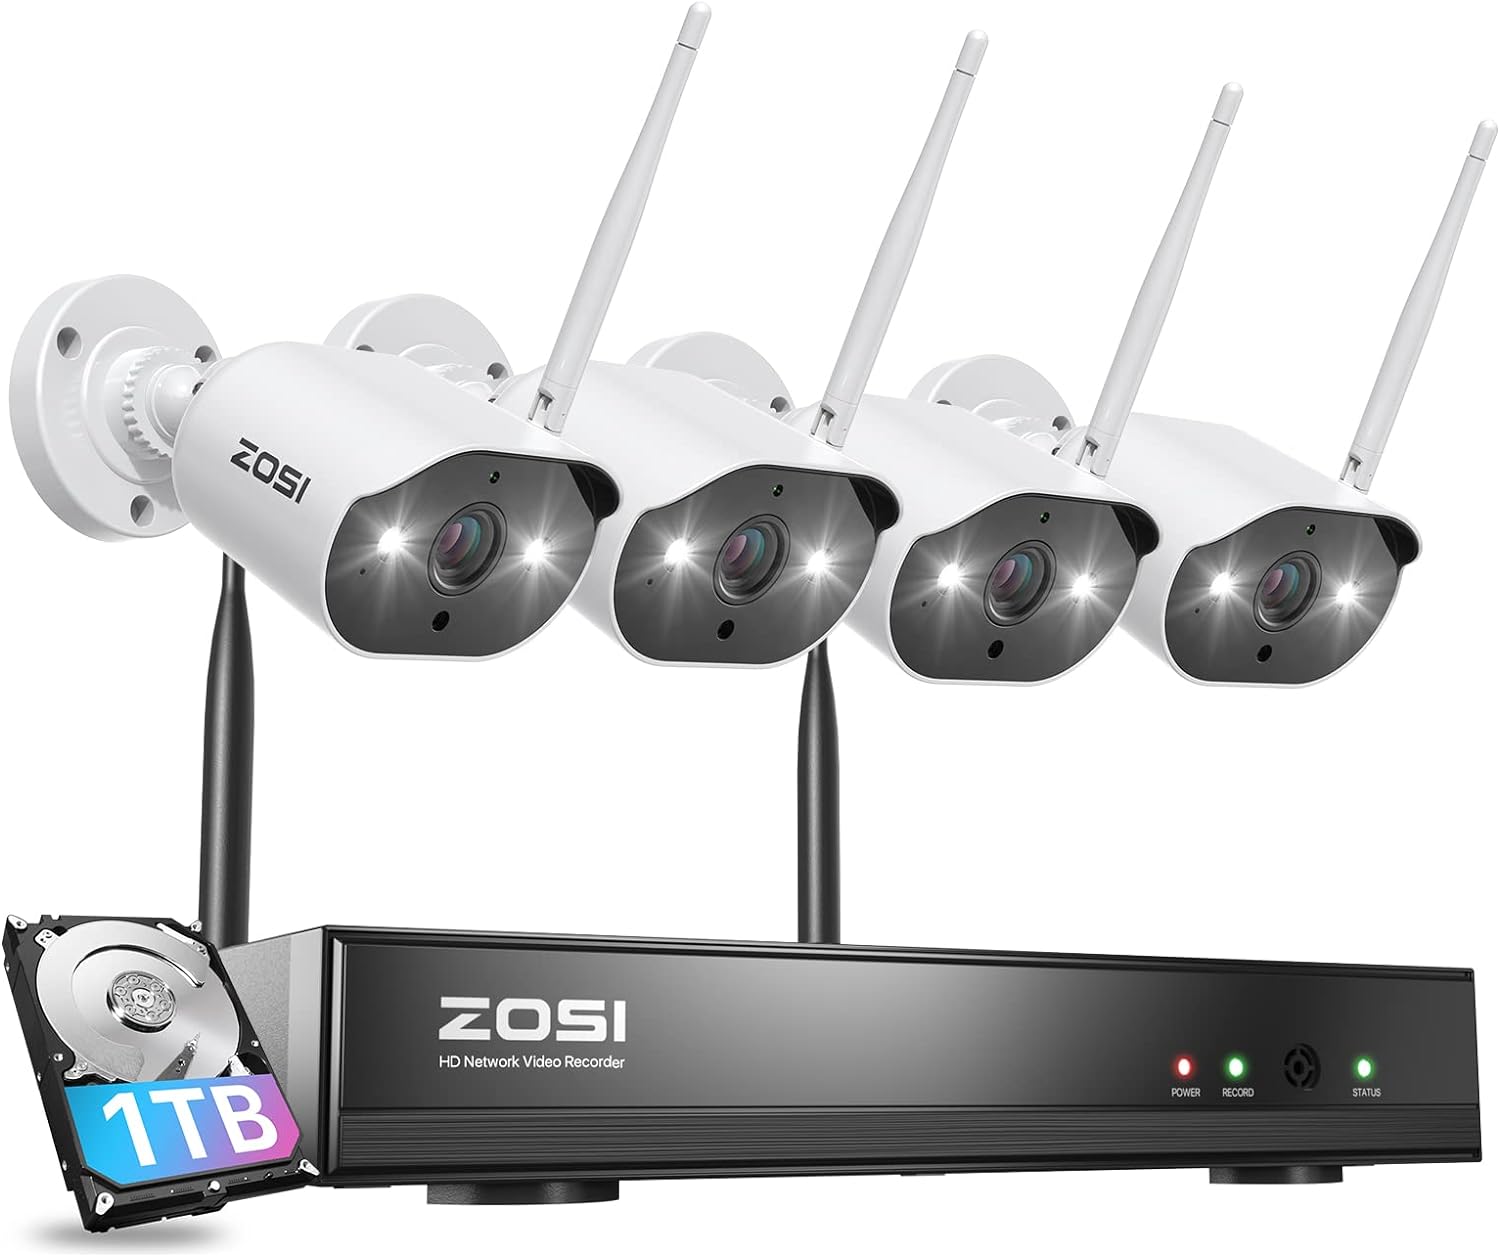 ZOSI 2K Wireless Security Camera System,2K H.265+ 8CH NVR with 1TB Hard Drive - $120